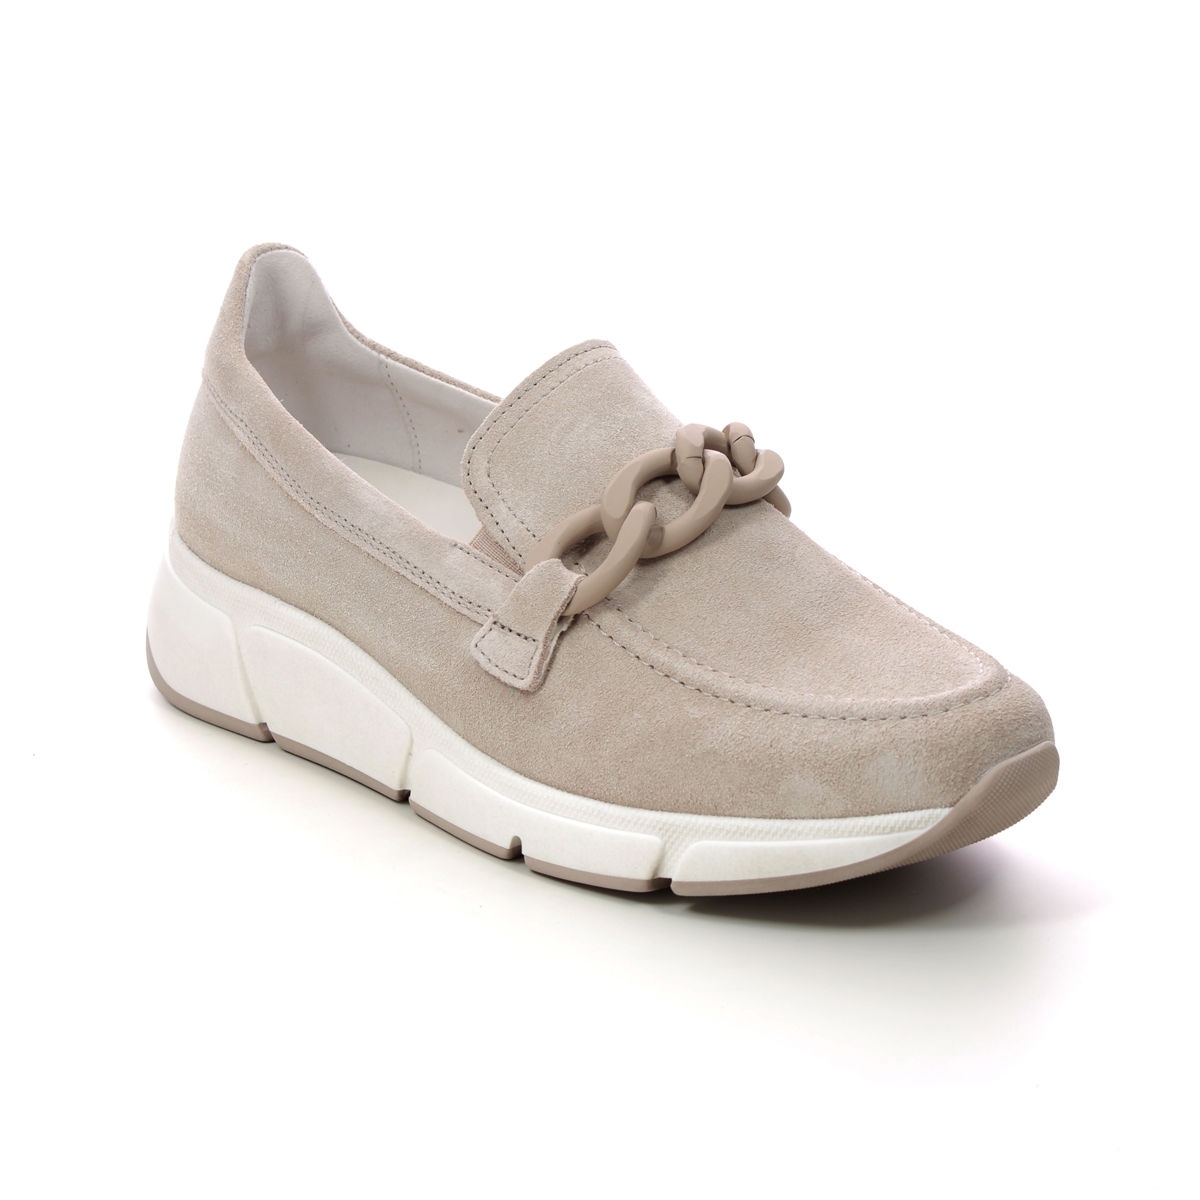 Gabor Factor Trainer Beige suede Womens loafers 26.485.33 in a Plain Leather in Size 6.5